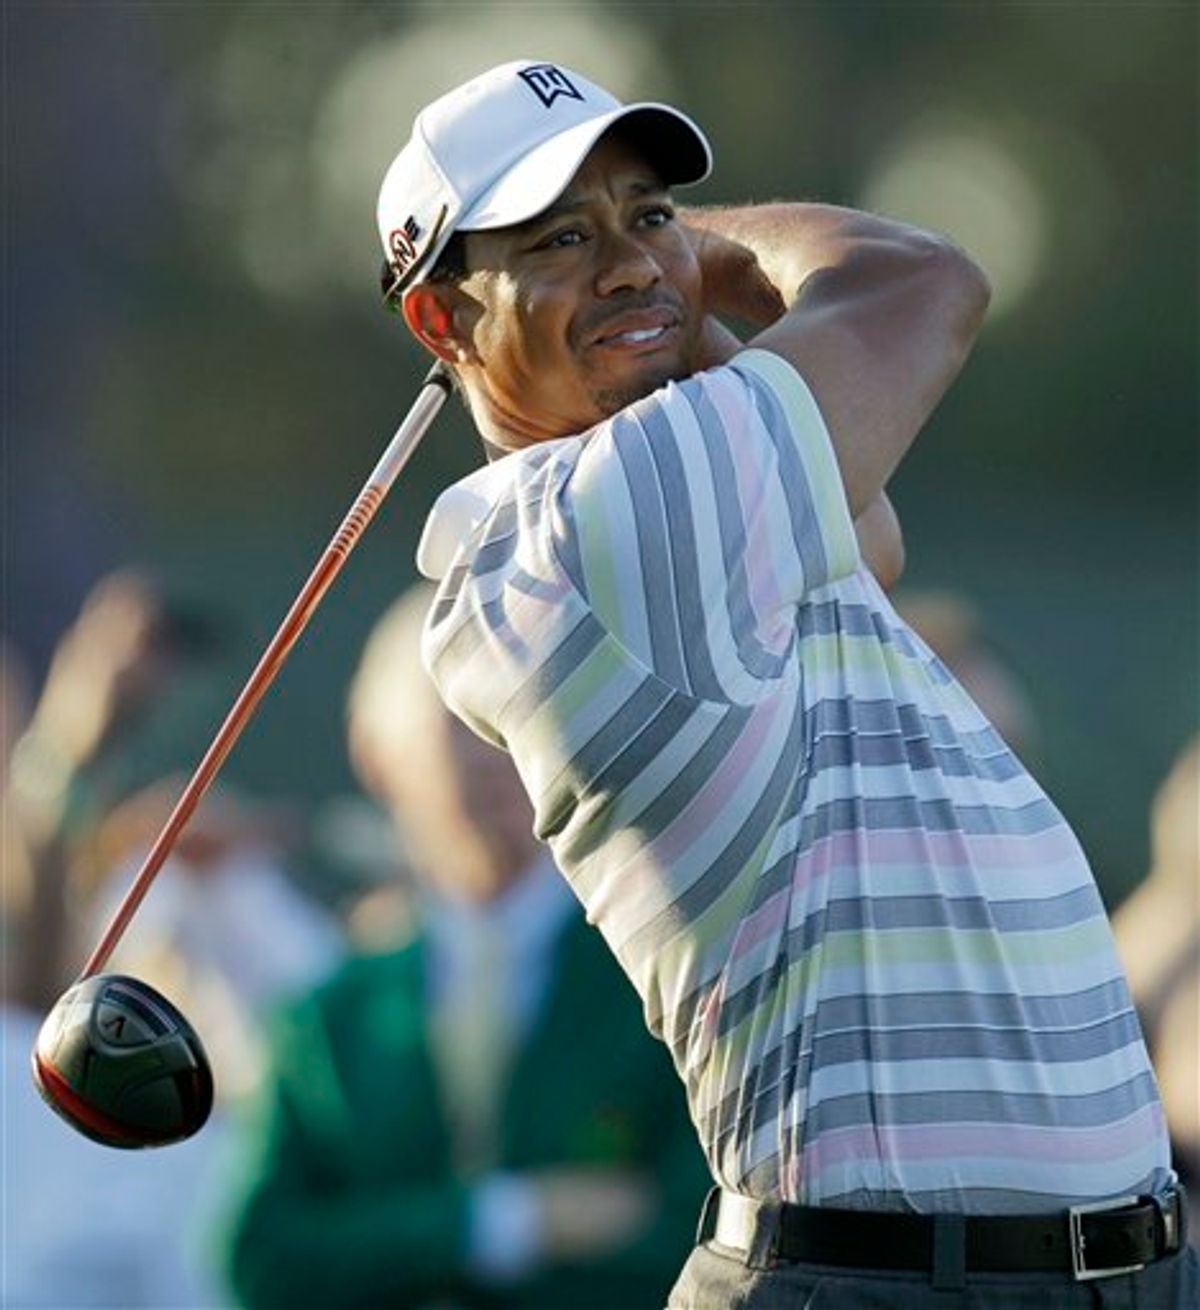 Tiger Woods tees off at the first hole during a practice round for the Masters golf tournament in Augusta, Ga., Monday, April 5, 2010. The tournament begins Thursday, April, 8. (AP Photo/Chris O'Meara) (AP)